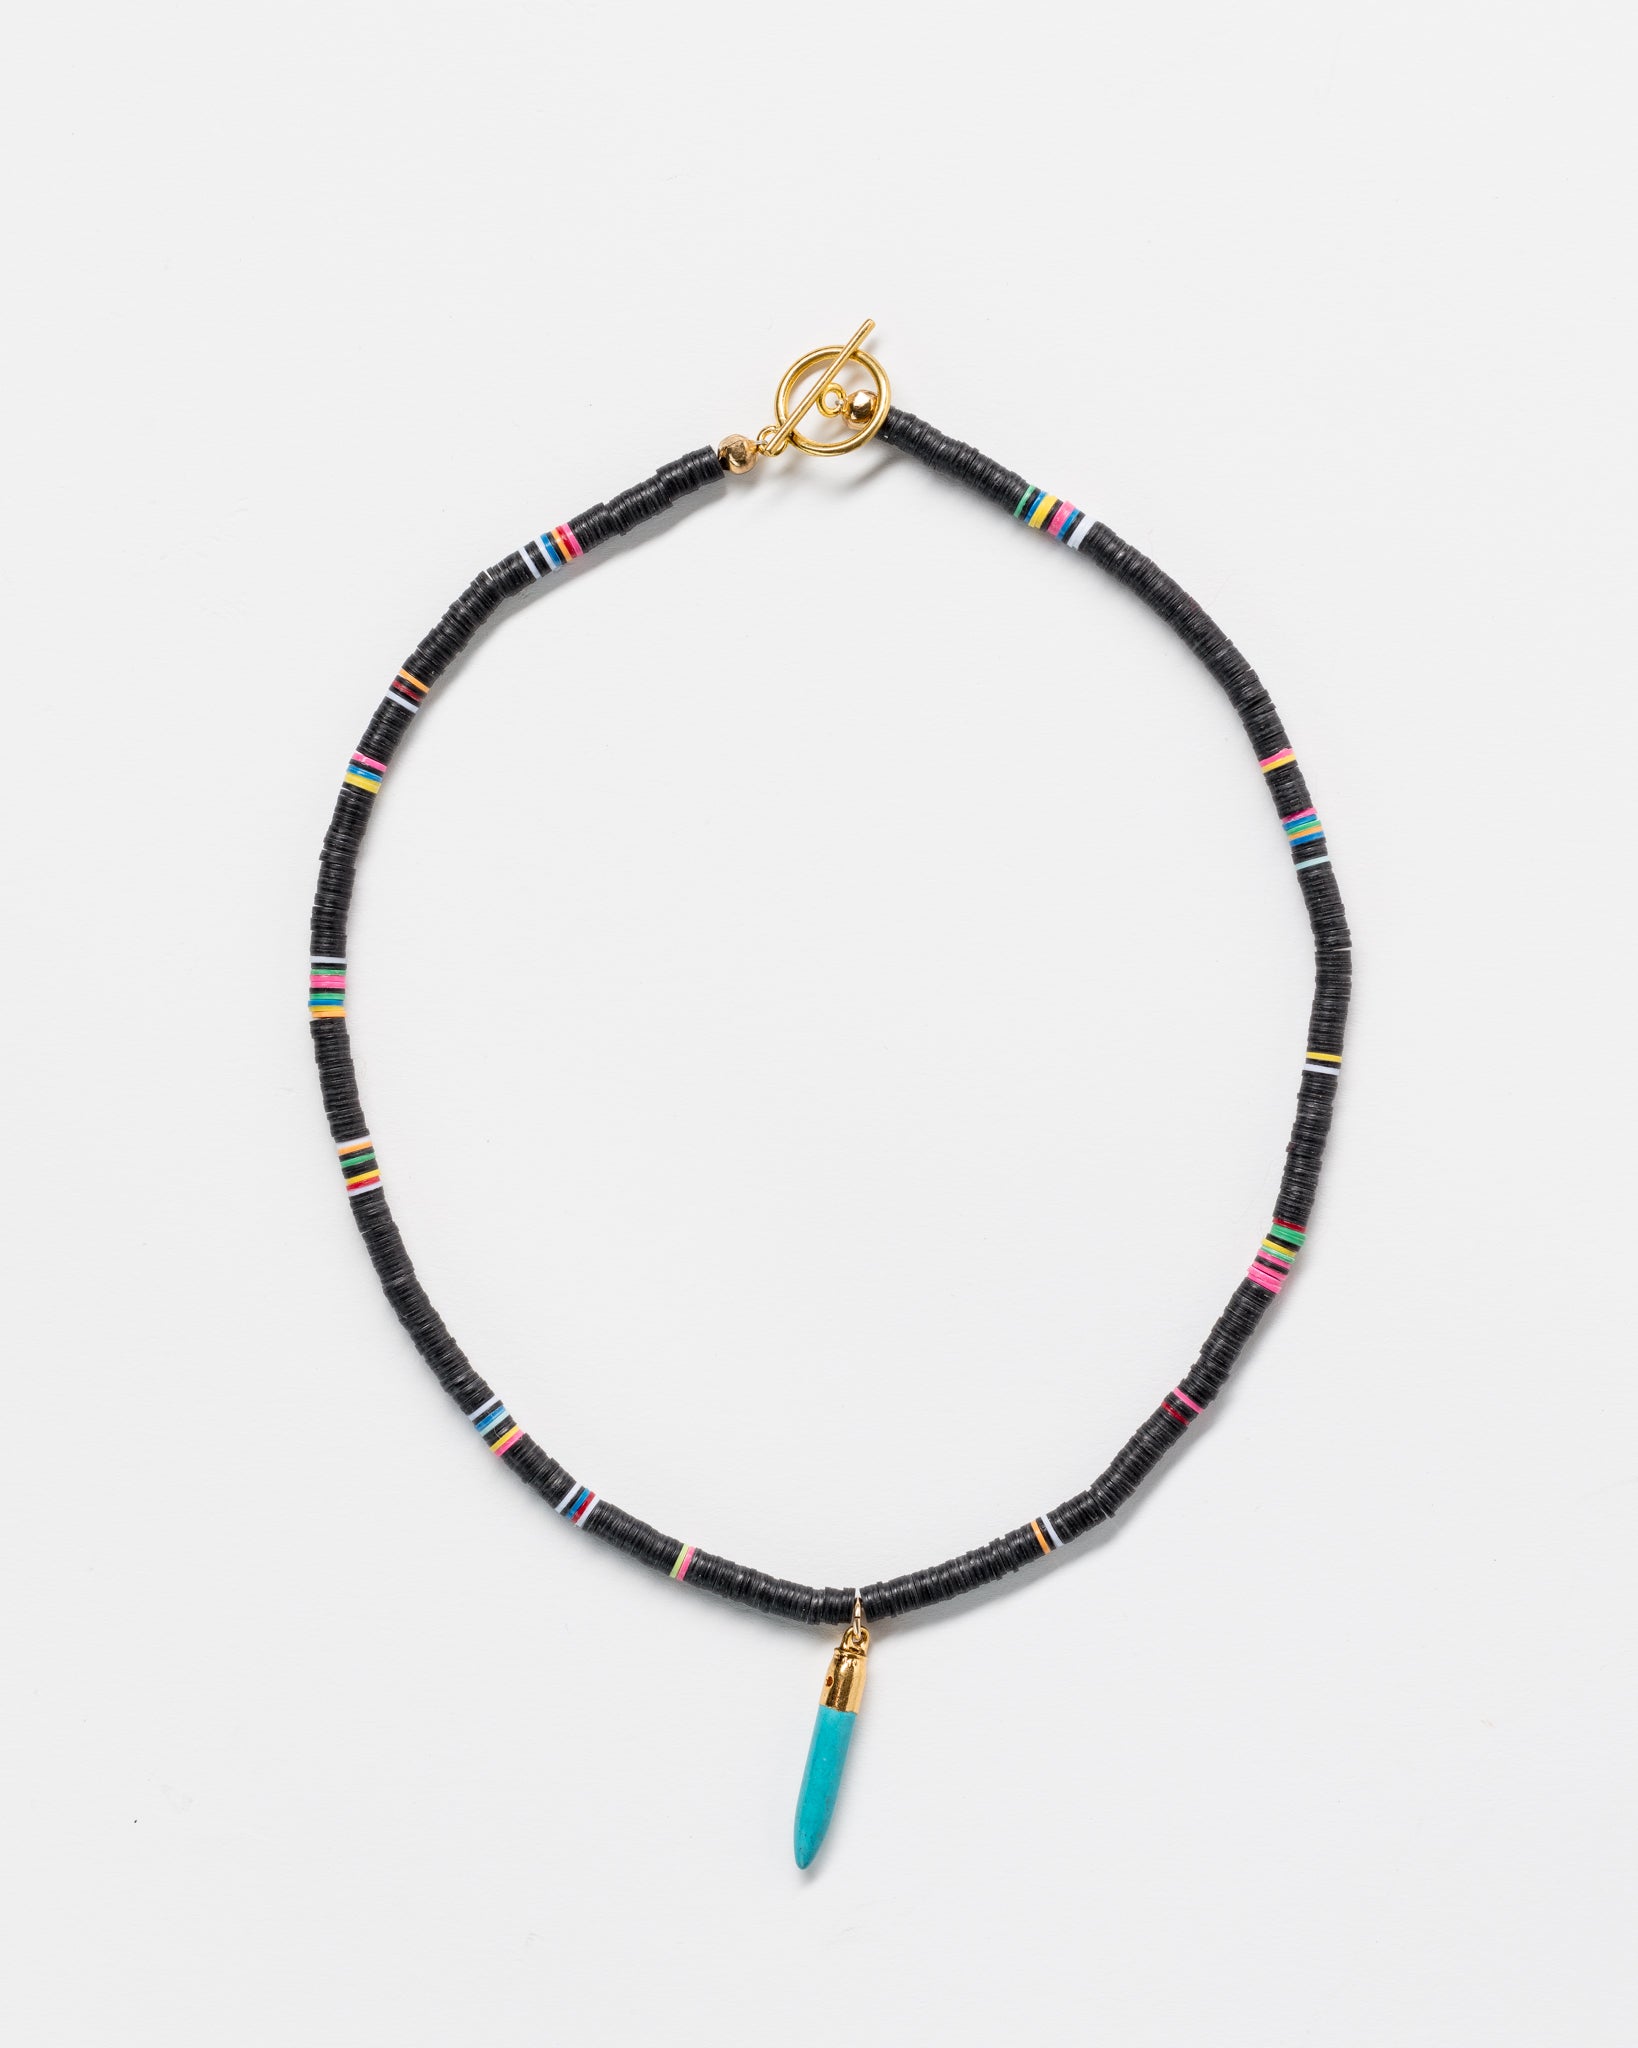 A Designs By Raya necklace made of black beads with colorful Arizona-style stripes, featuring gold accents and a turquoise pendant, displayed on a white background.